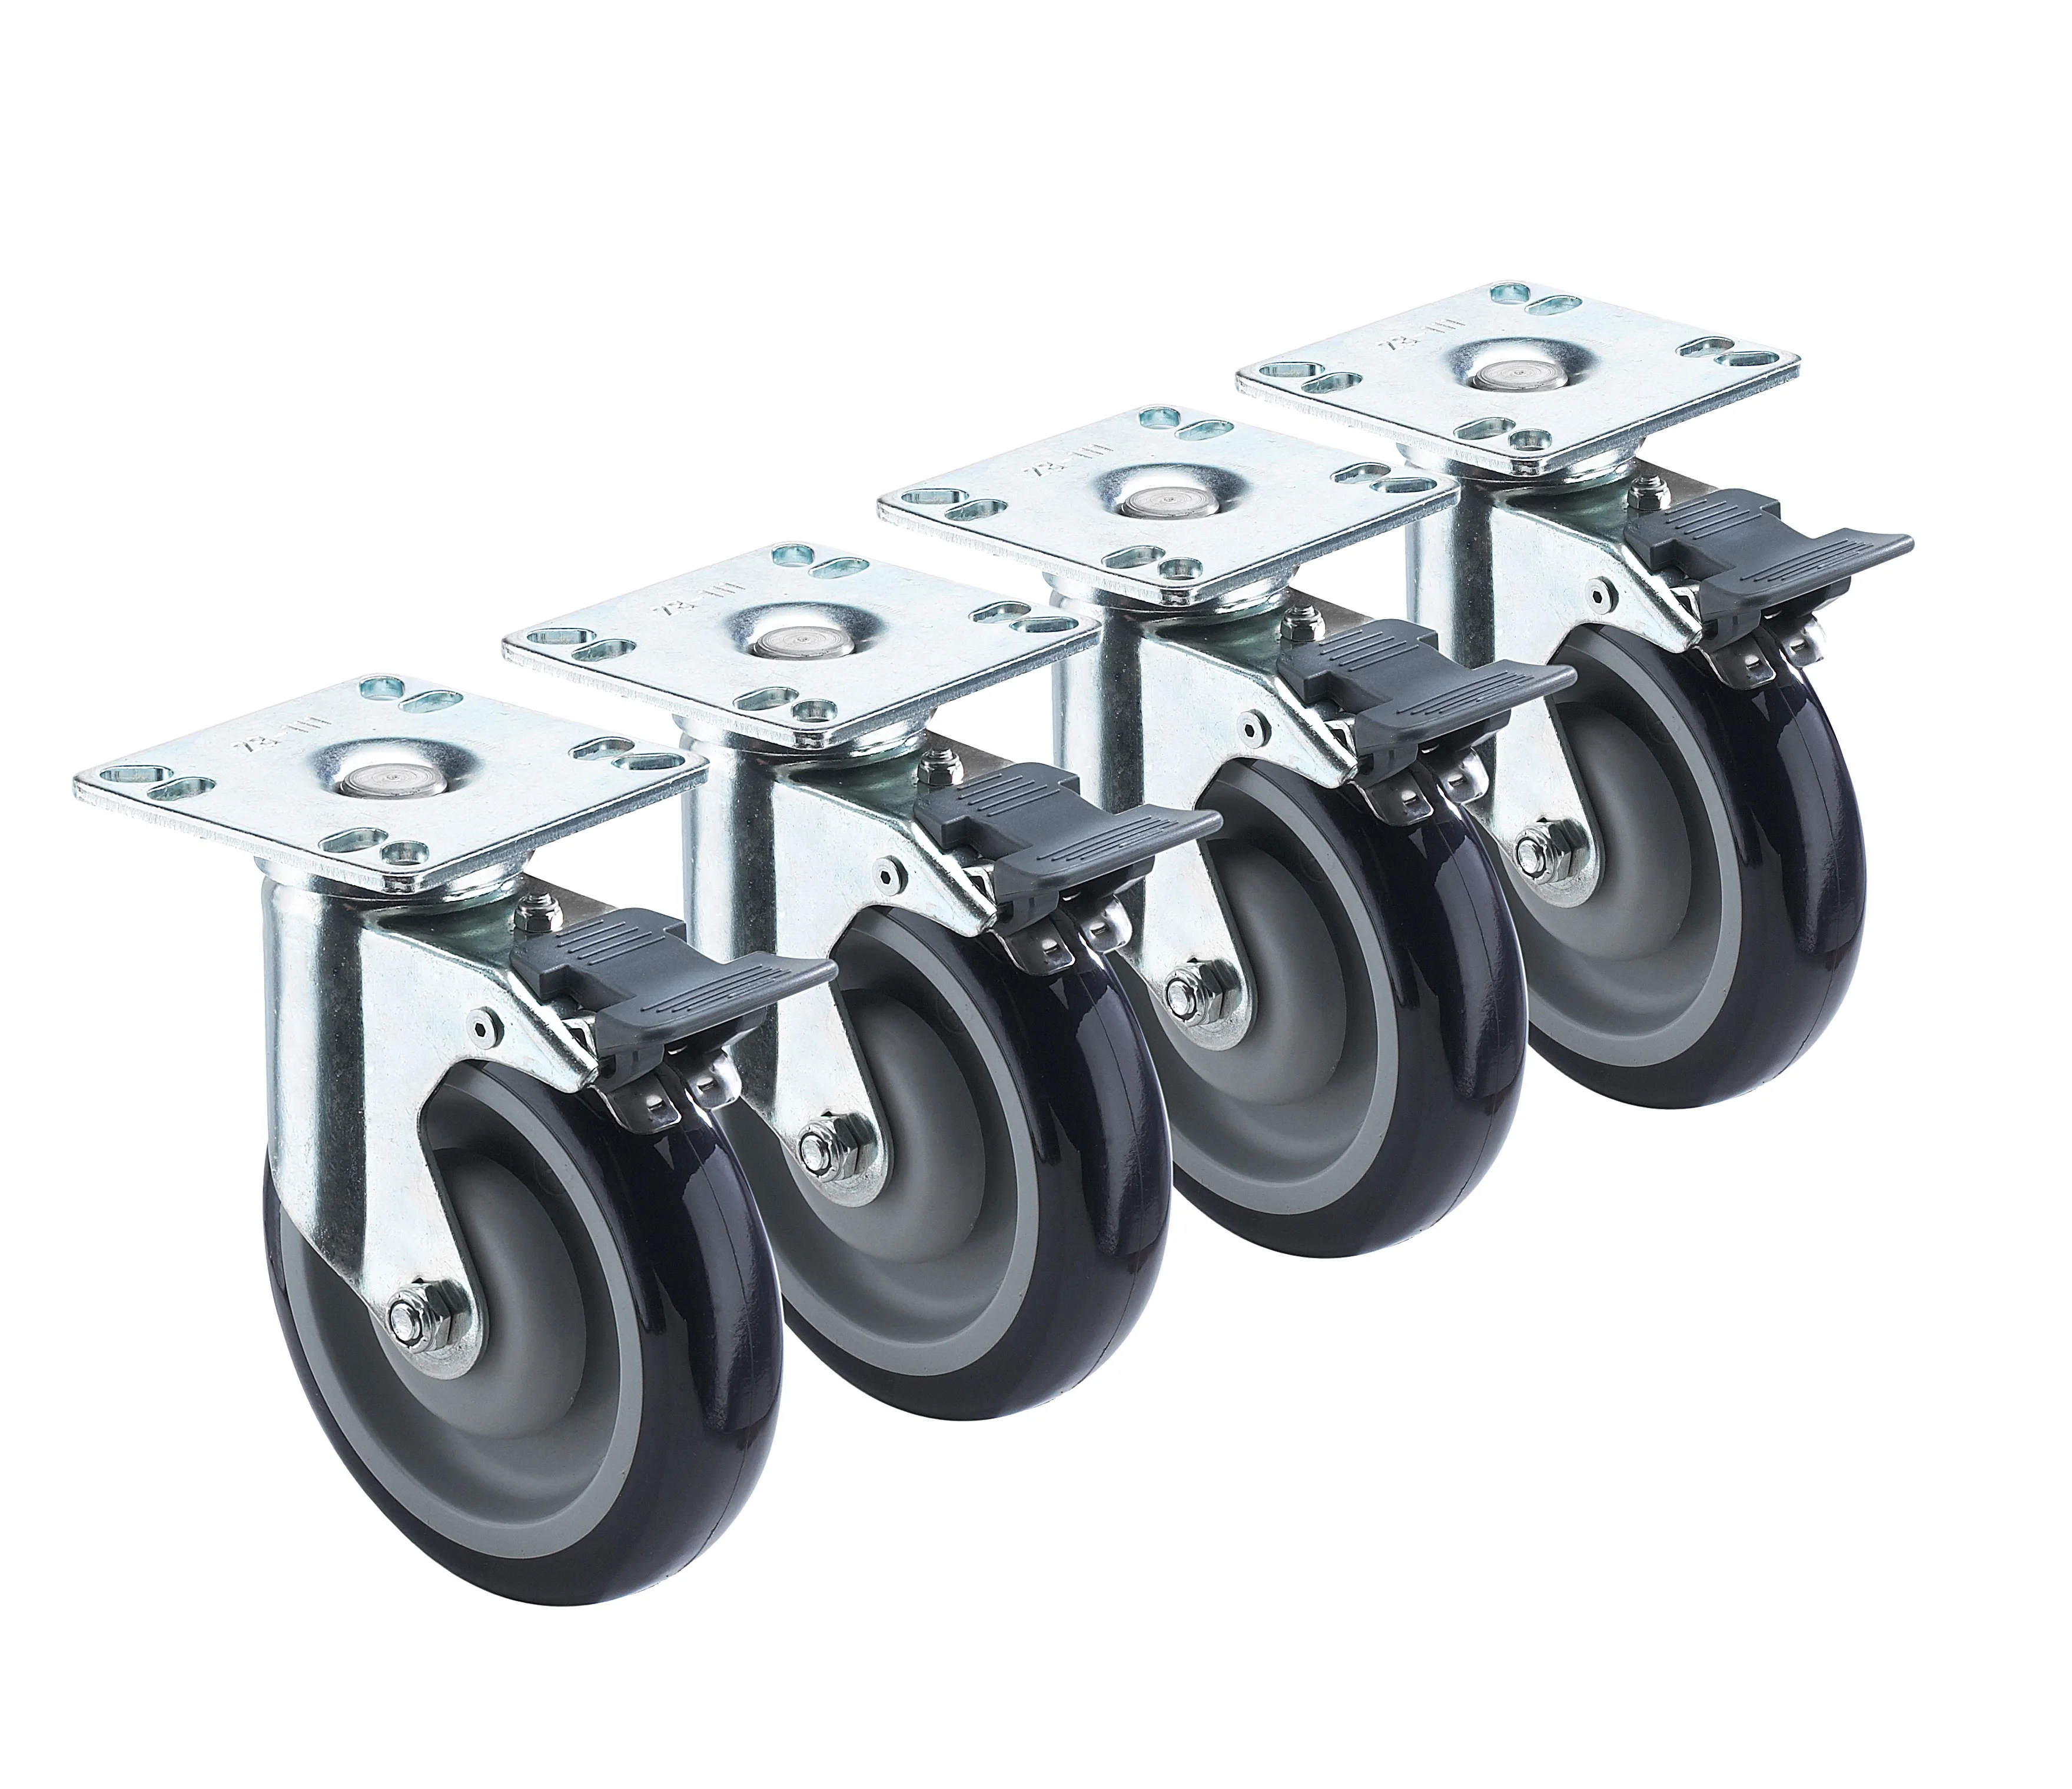 Krowne 28220S - 3-1/2" x 3-1/2" Universal Plate Caster with Front Brake - 5" Wheel - Set of 4